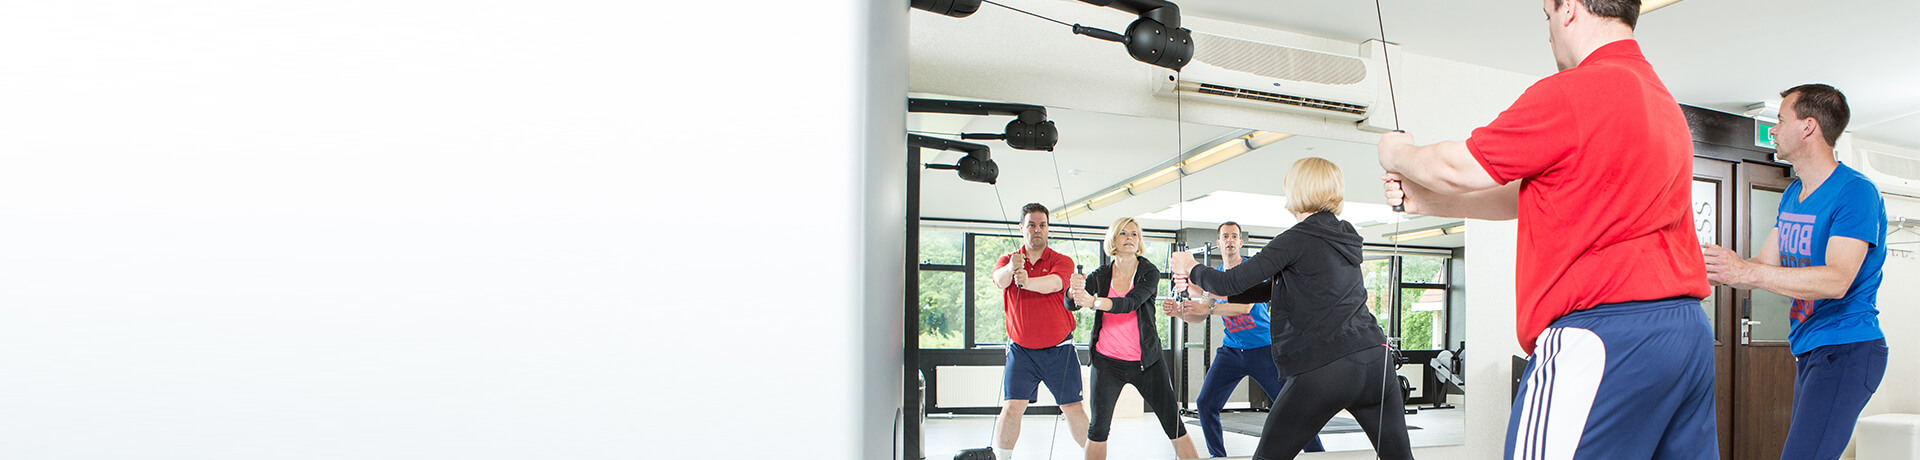 personal training oldenzaal